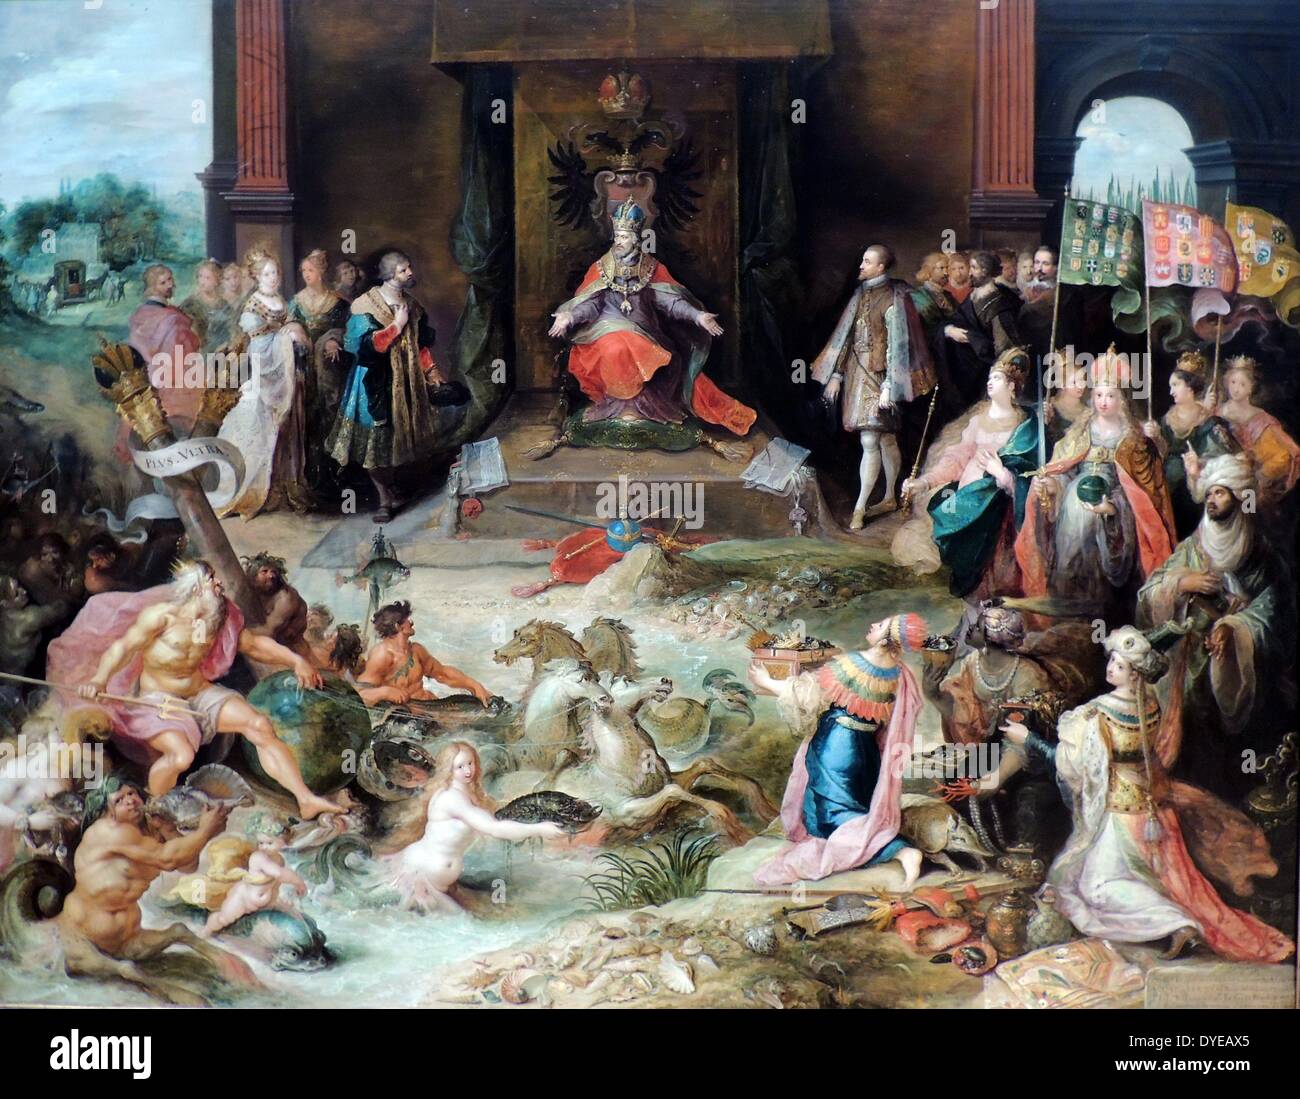 Allegory on the Abdication of Emperor Charles V in Brussels. Frans Francken II (1581-1642) oil on panel, (c 1630-1640) Charles V is enthroned at centre. Battle weary and wracked by illness, in 1555 he divided up his empire. He gave his brother Ferdinand (left of the throne) the Holy Roman Empire, while his son Phillip (at the right) became King of Spain and Lord of the Netherlands. The four figures in the right foreground personify the continents over which Charles's vast empire stretched. Neptune (left) symbolized his power at sea. Stock Photo